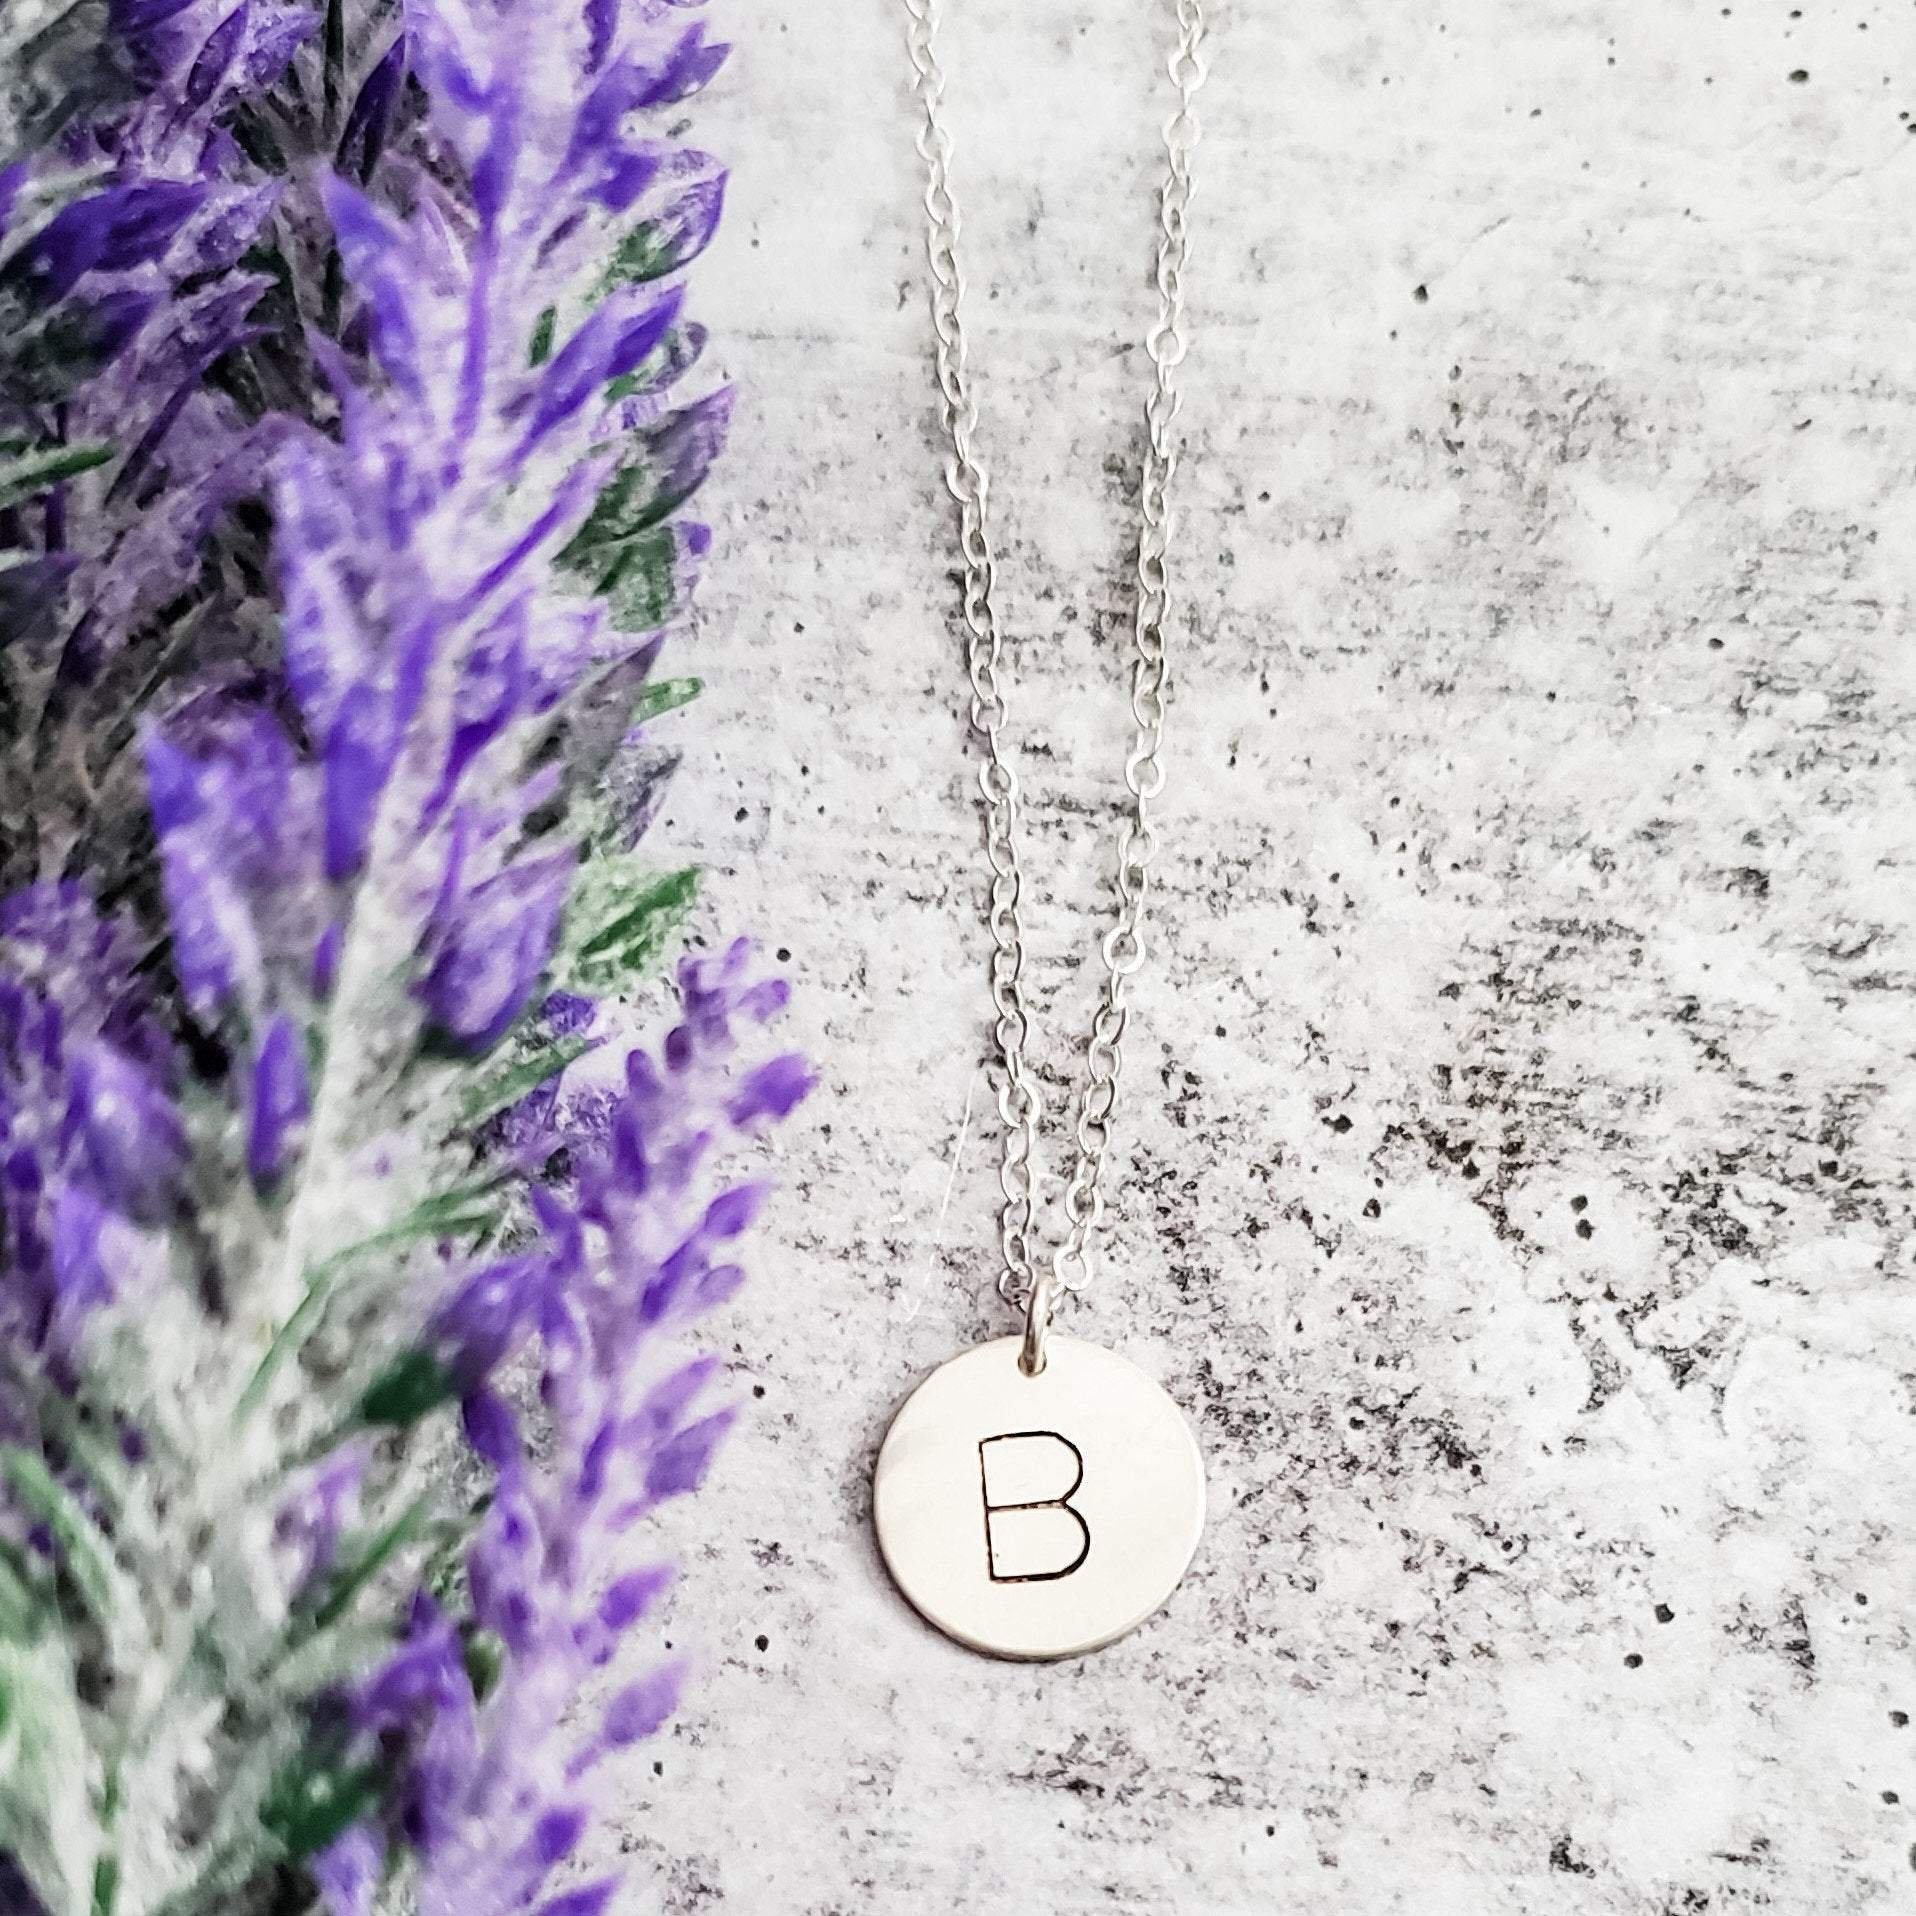 Uppercase Initial Circle Disc Necklace Salt and Sparkle